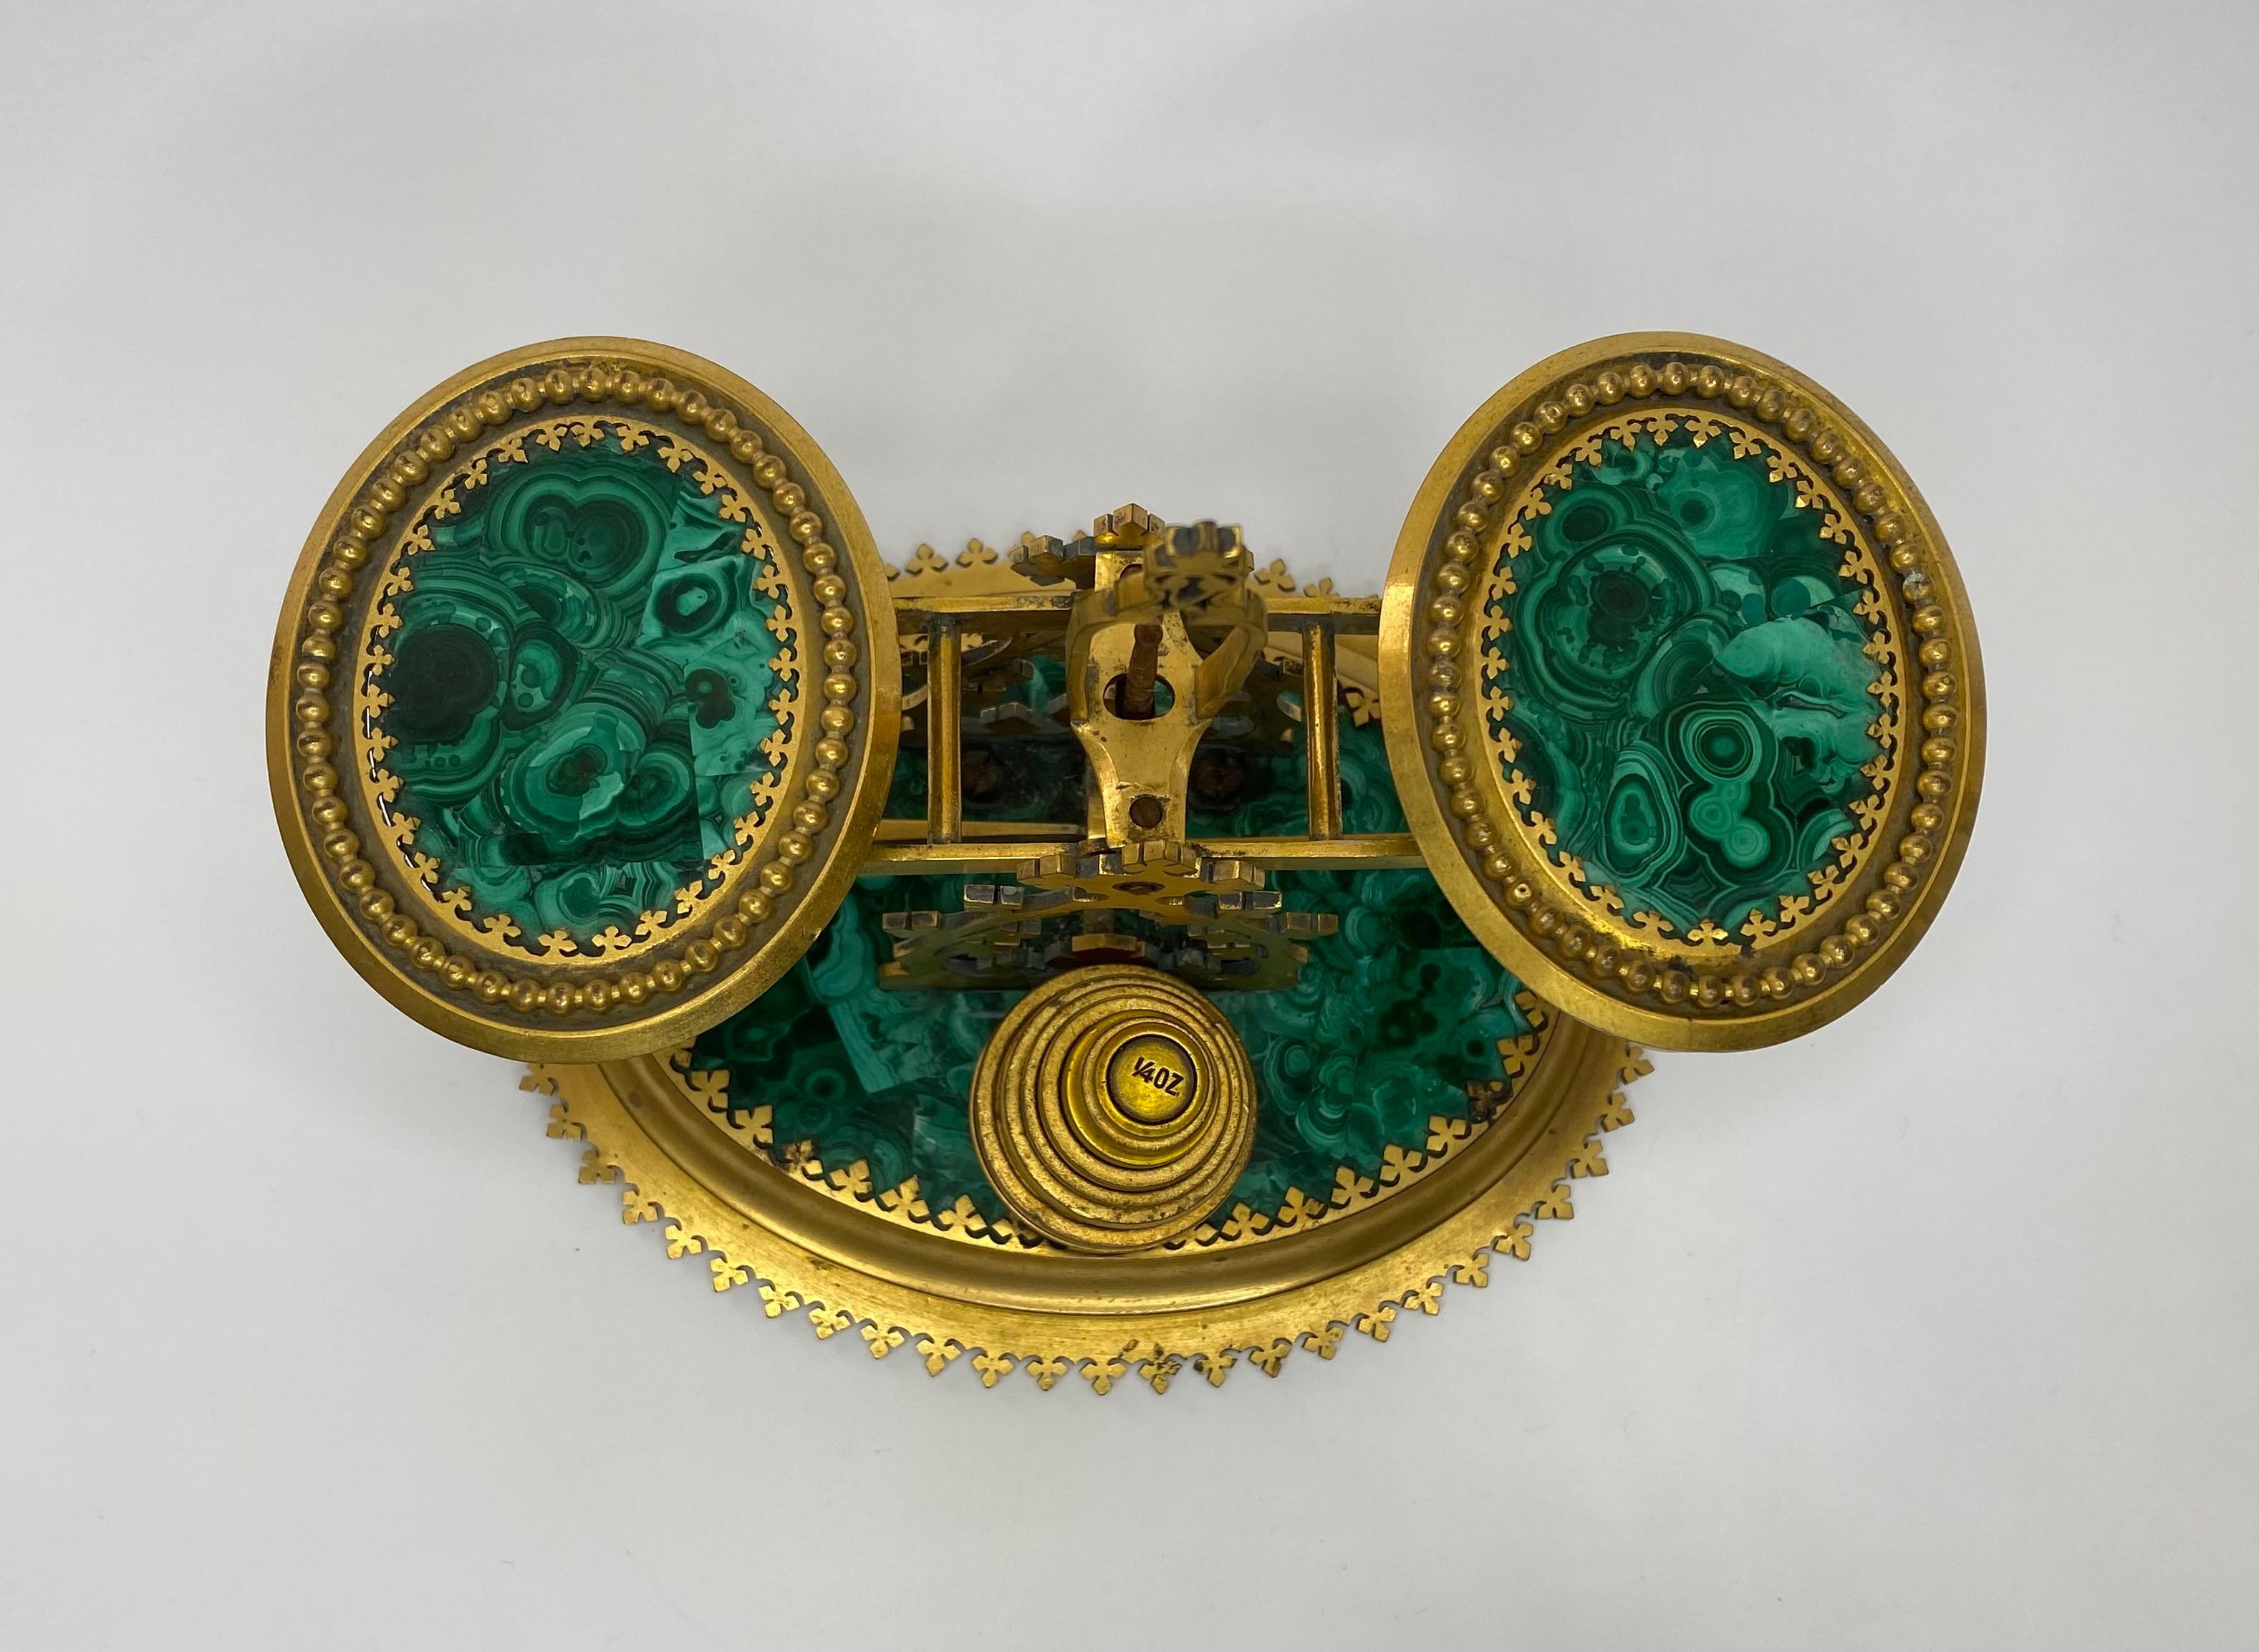 A fine and rare set of malachite and gilt metal postal scales, Halstaff and Hannaford, 228, Regent Street, London, c. 1850. The Gothic form scales, set upon an oval base, of solid malachite, with gilt metal mounts.
Original set of graduated, gilded